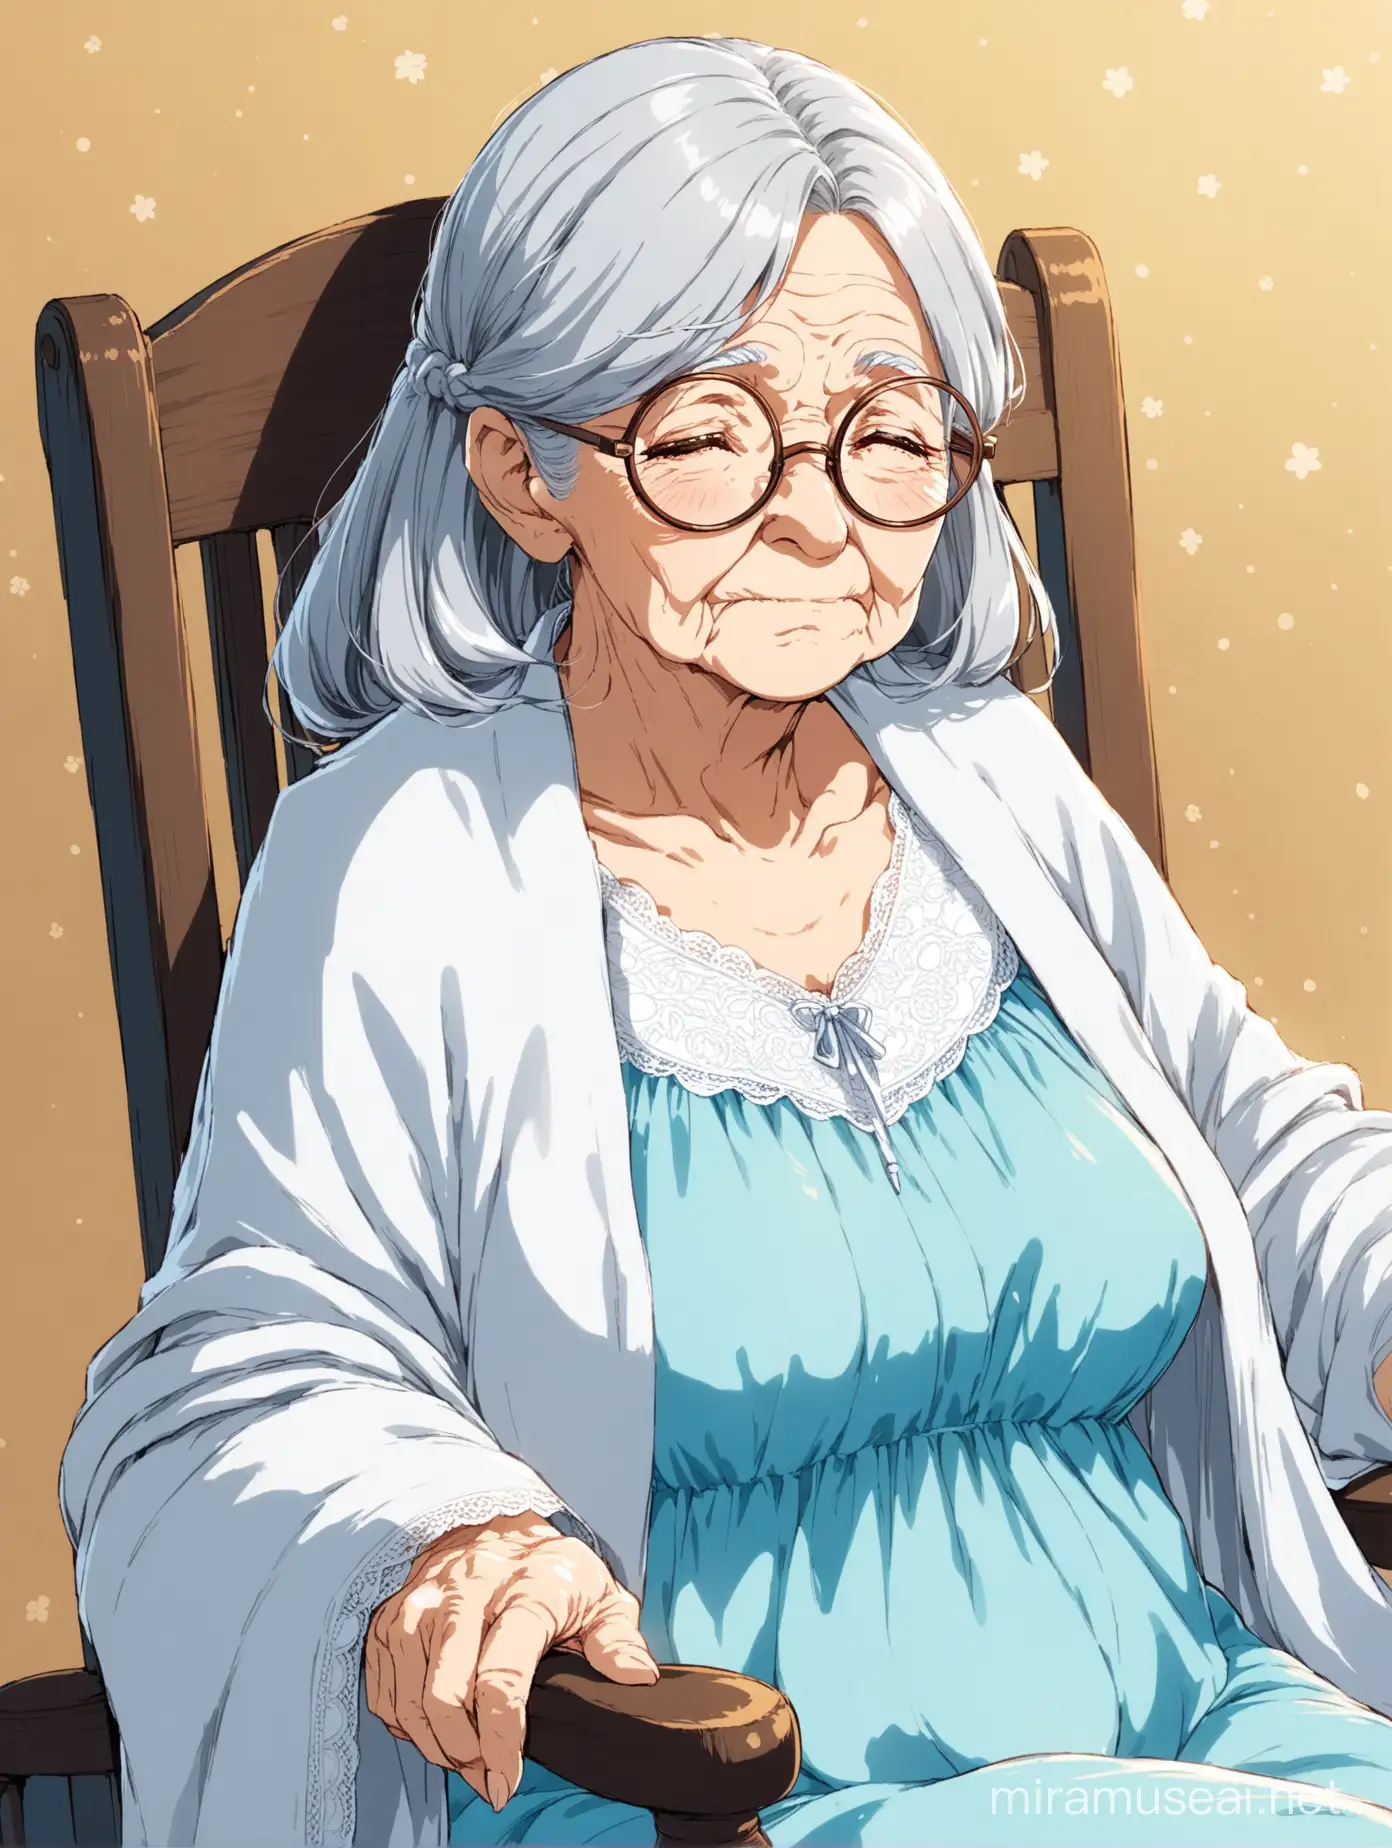 Anime, Old lady, wrinkled, with long gray hair, wearing light blue nightgown, white shawl, round glasses, on rocking chair.